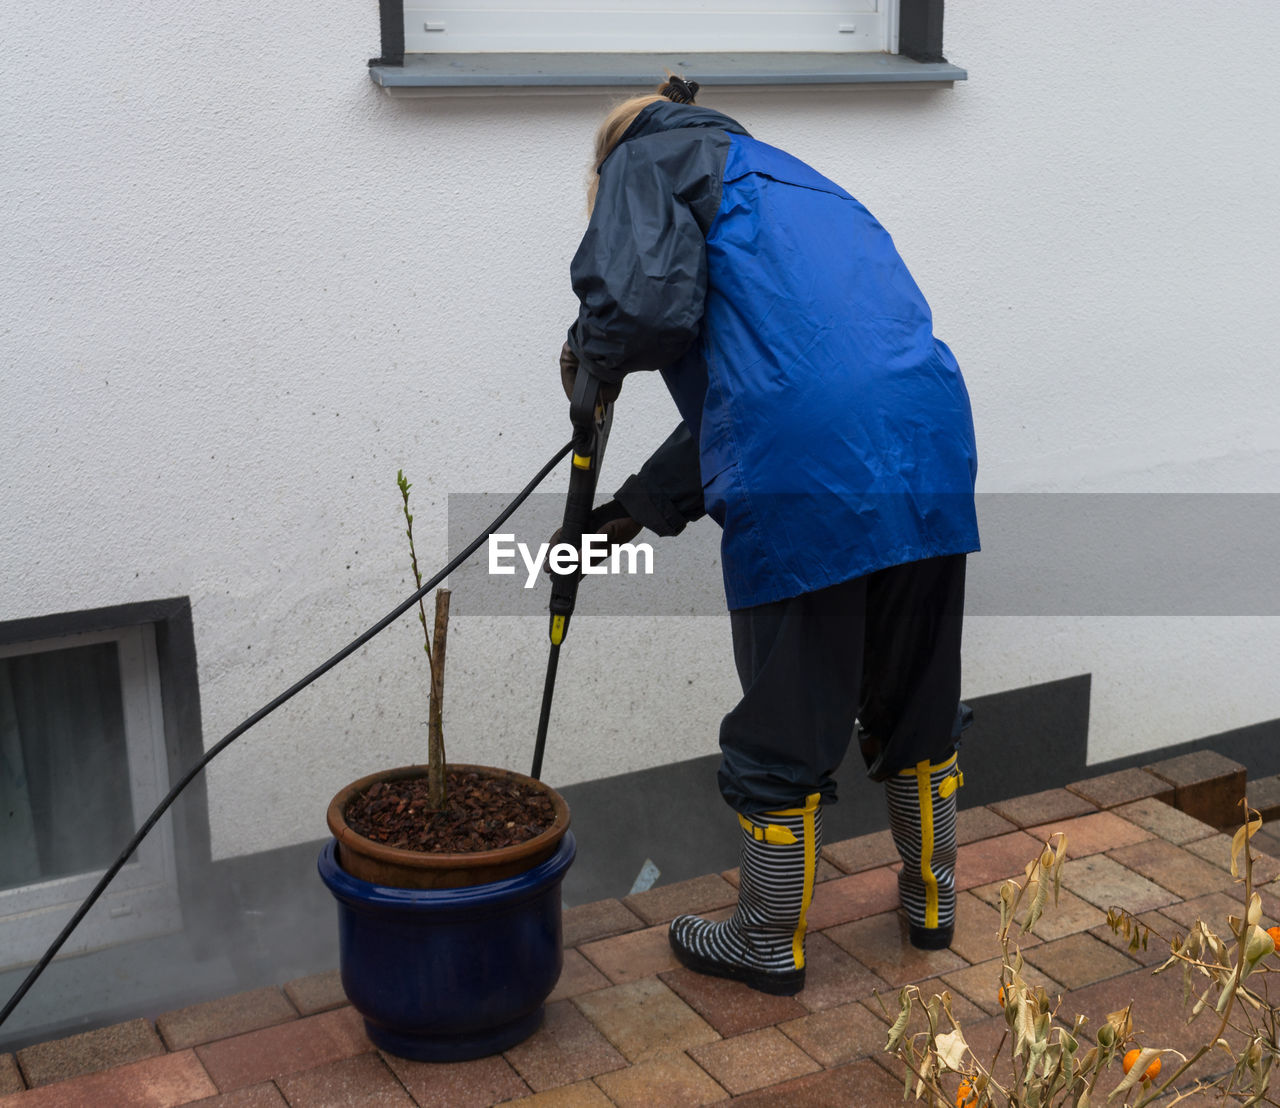 Rear view of woman working by potted plant against wall